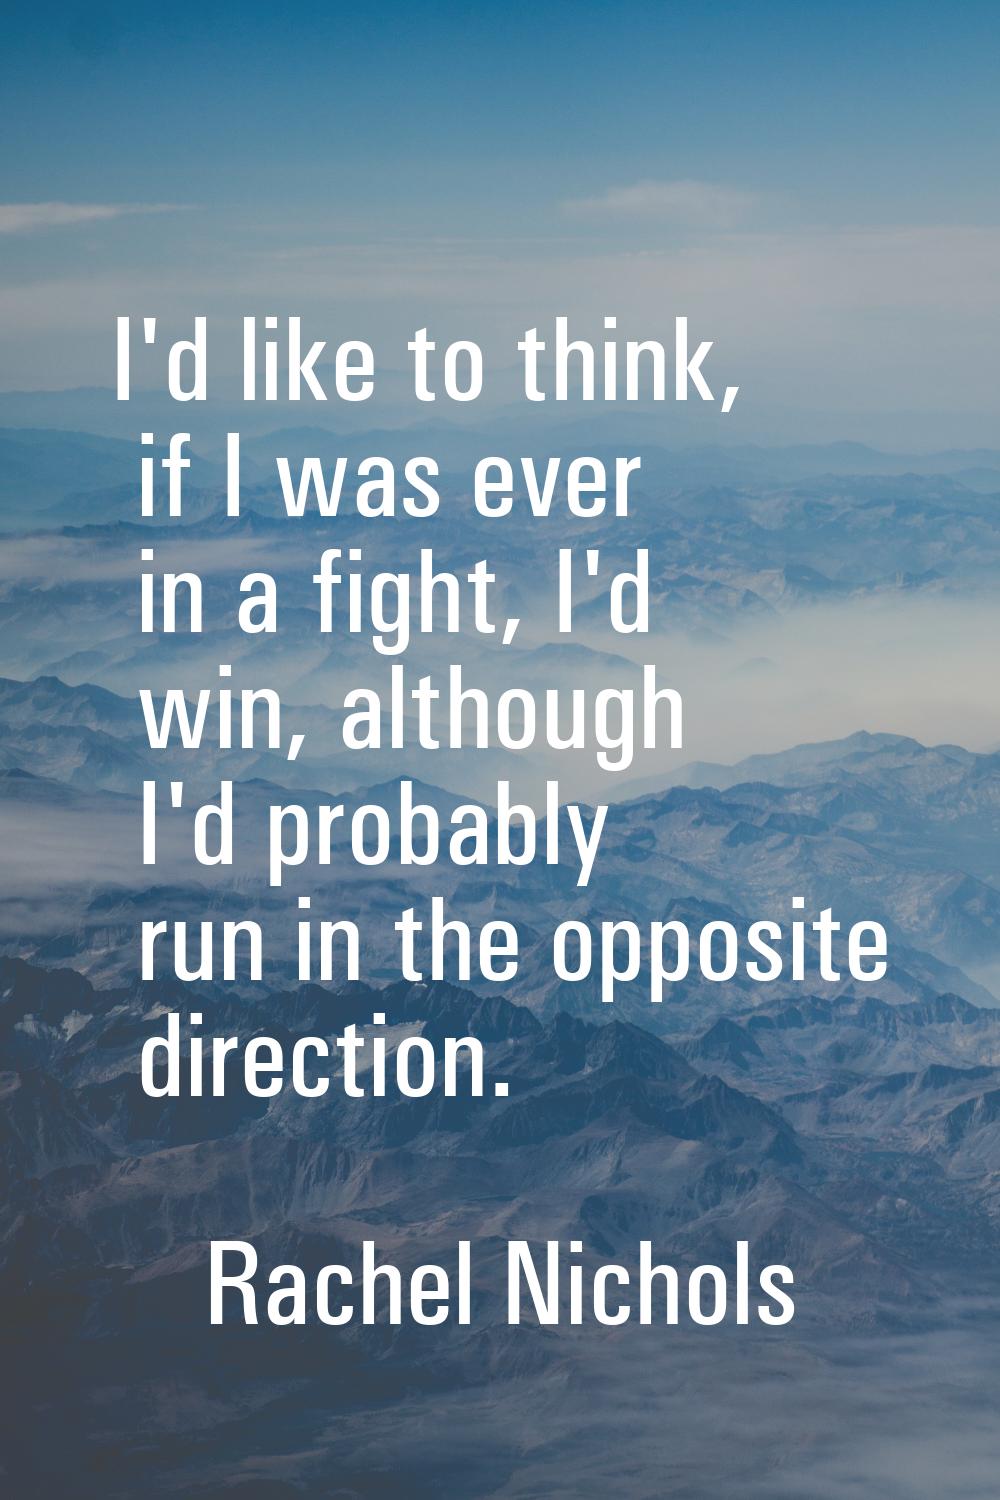 I'd like to think, if I was ever in a fight, I'd win, although I'd probably run in the opposite dir